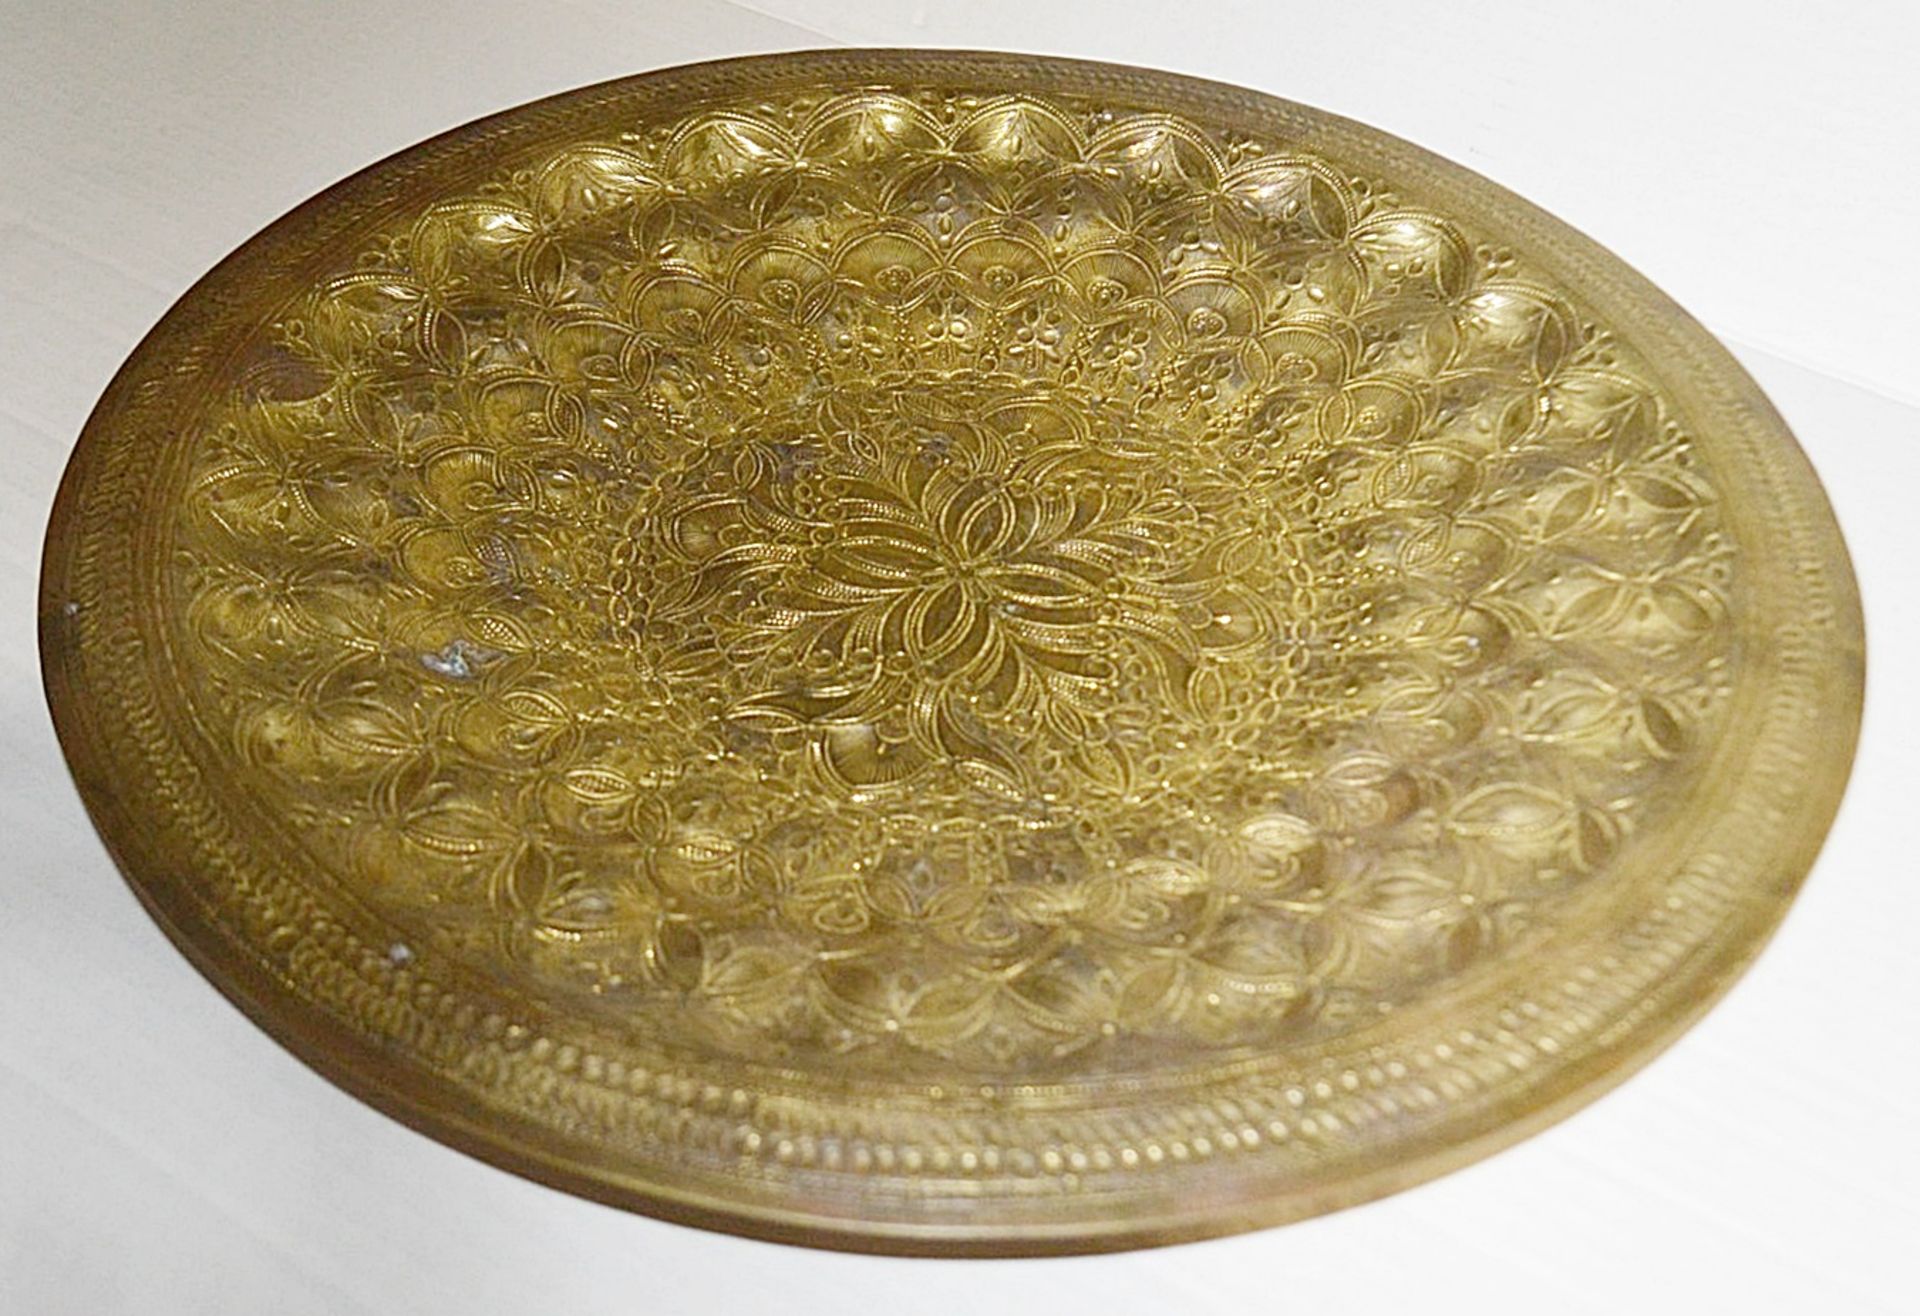 1 x Persian / Ottoman Gilt Metal Tombak Charger - 35cm (13.75ins) In Diameter - Preowned - NO VAT ON - Image 4 of 5